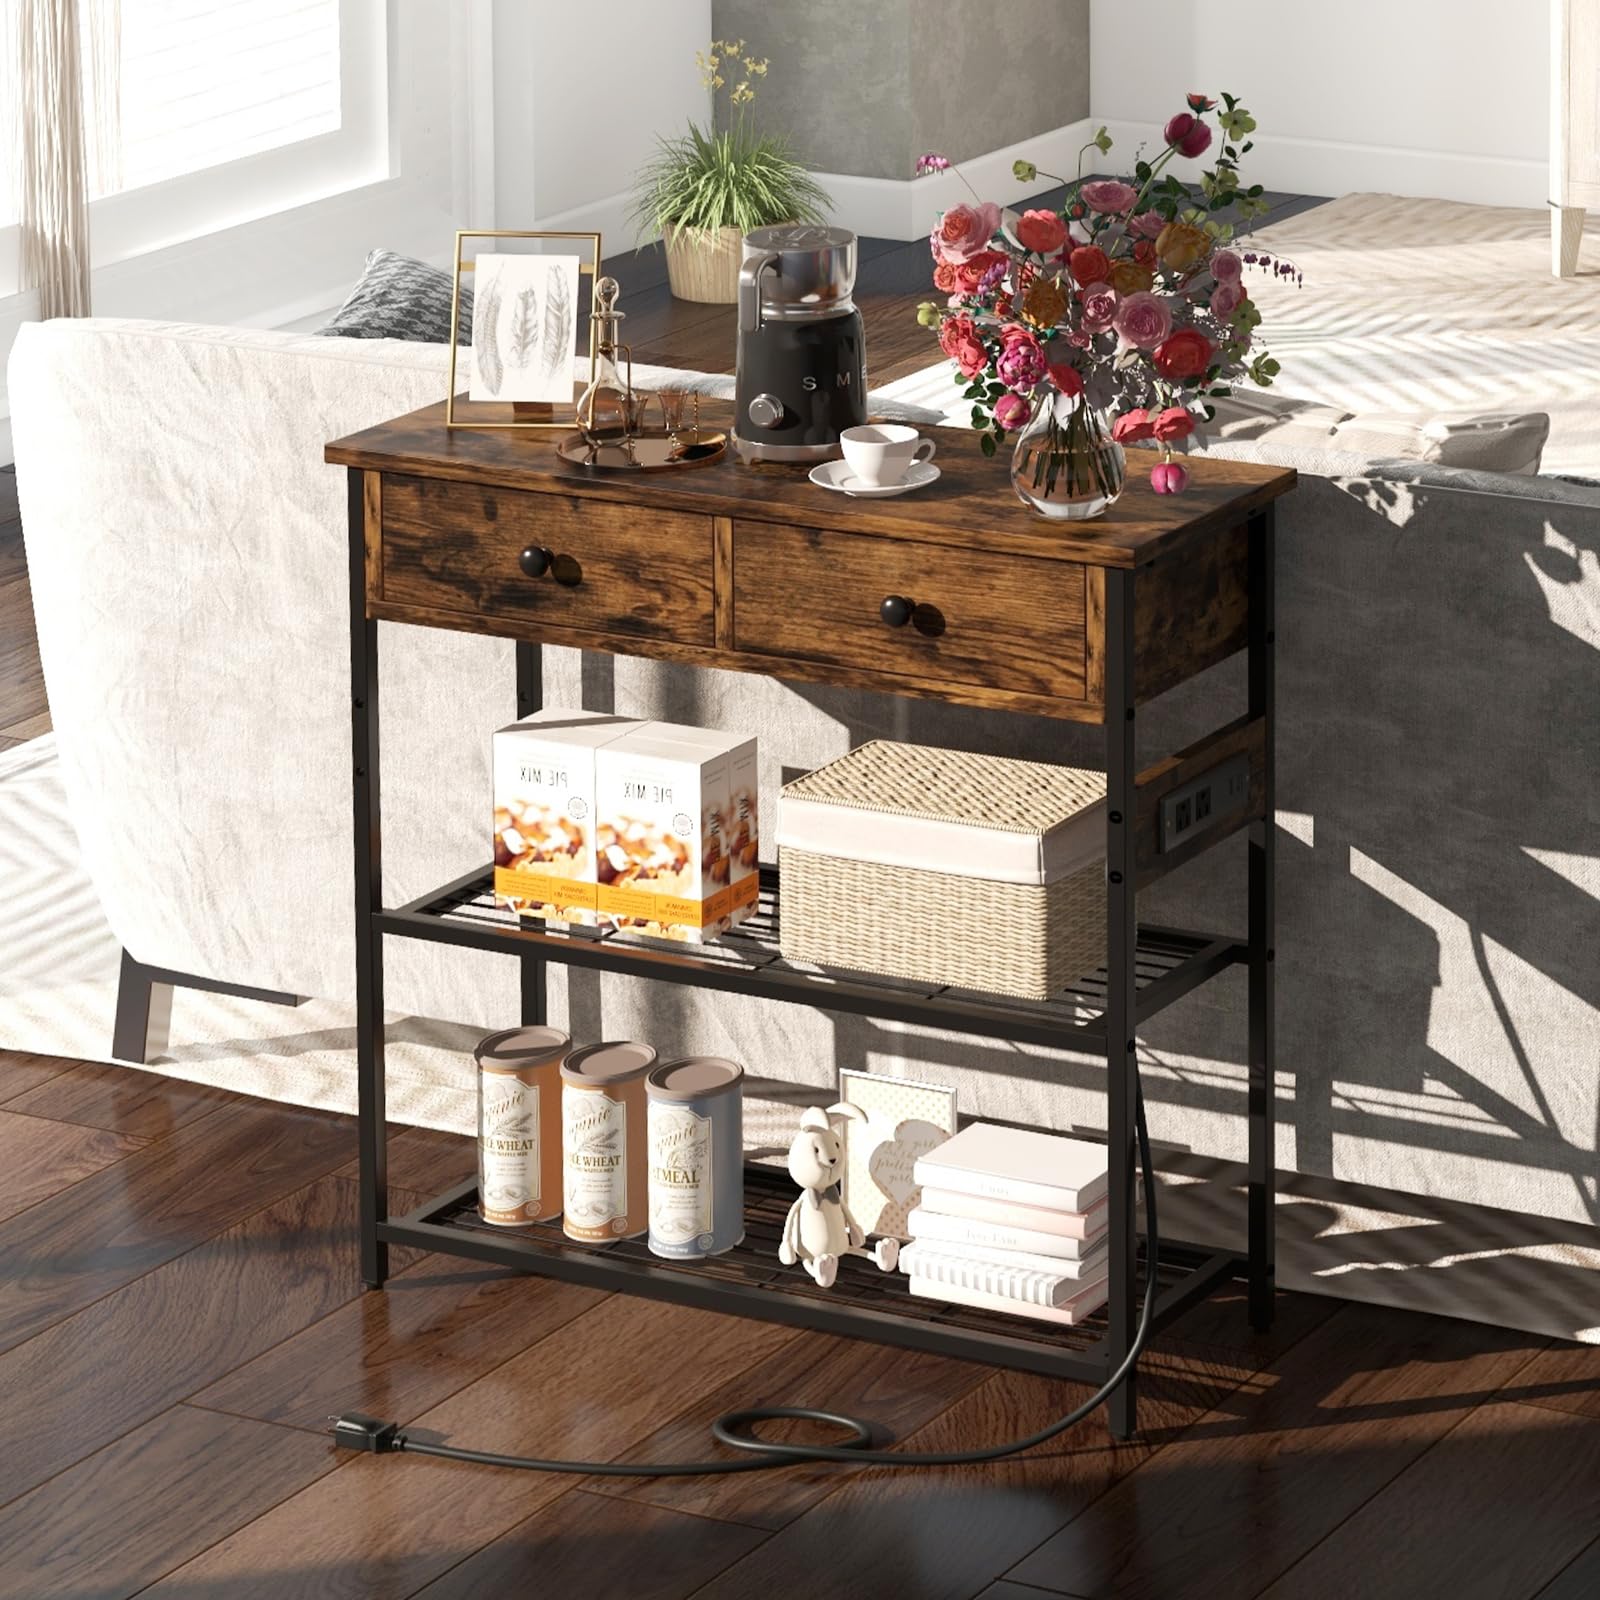 Giantex Console Table with Outlets - 3-Tier Entryway Table w/USB Ports, 2 Storage Drawers